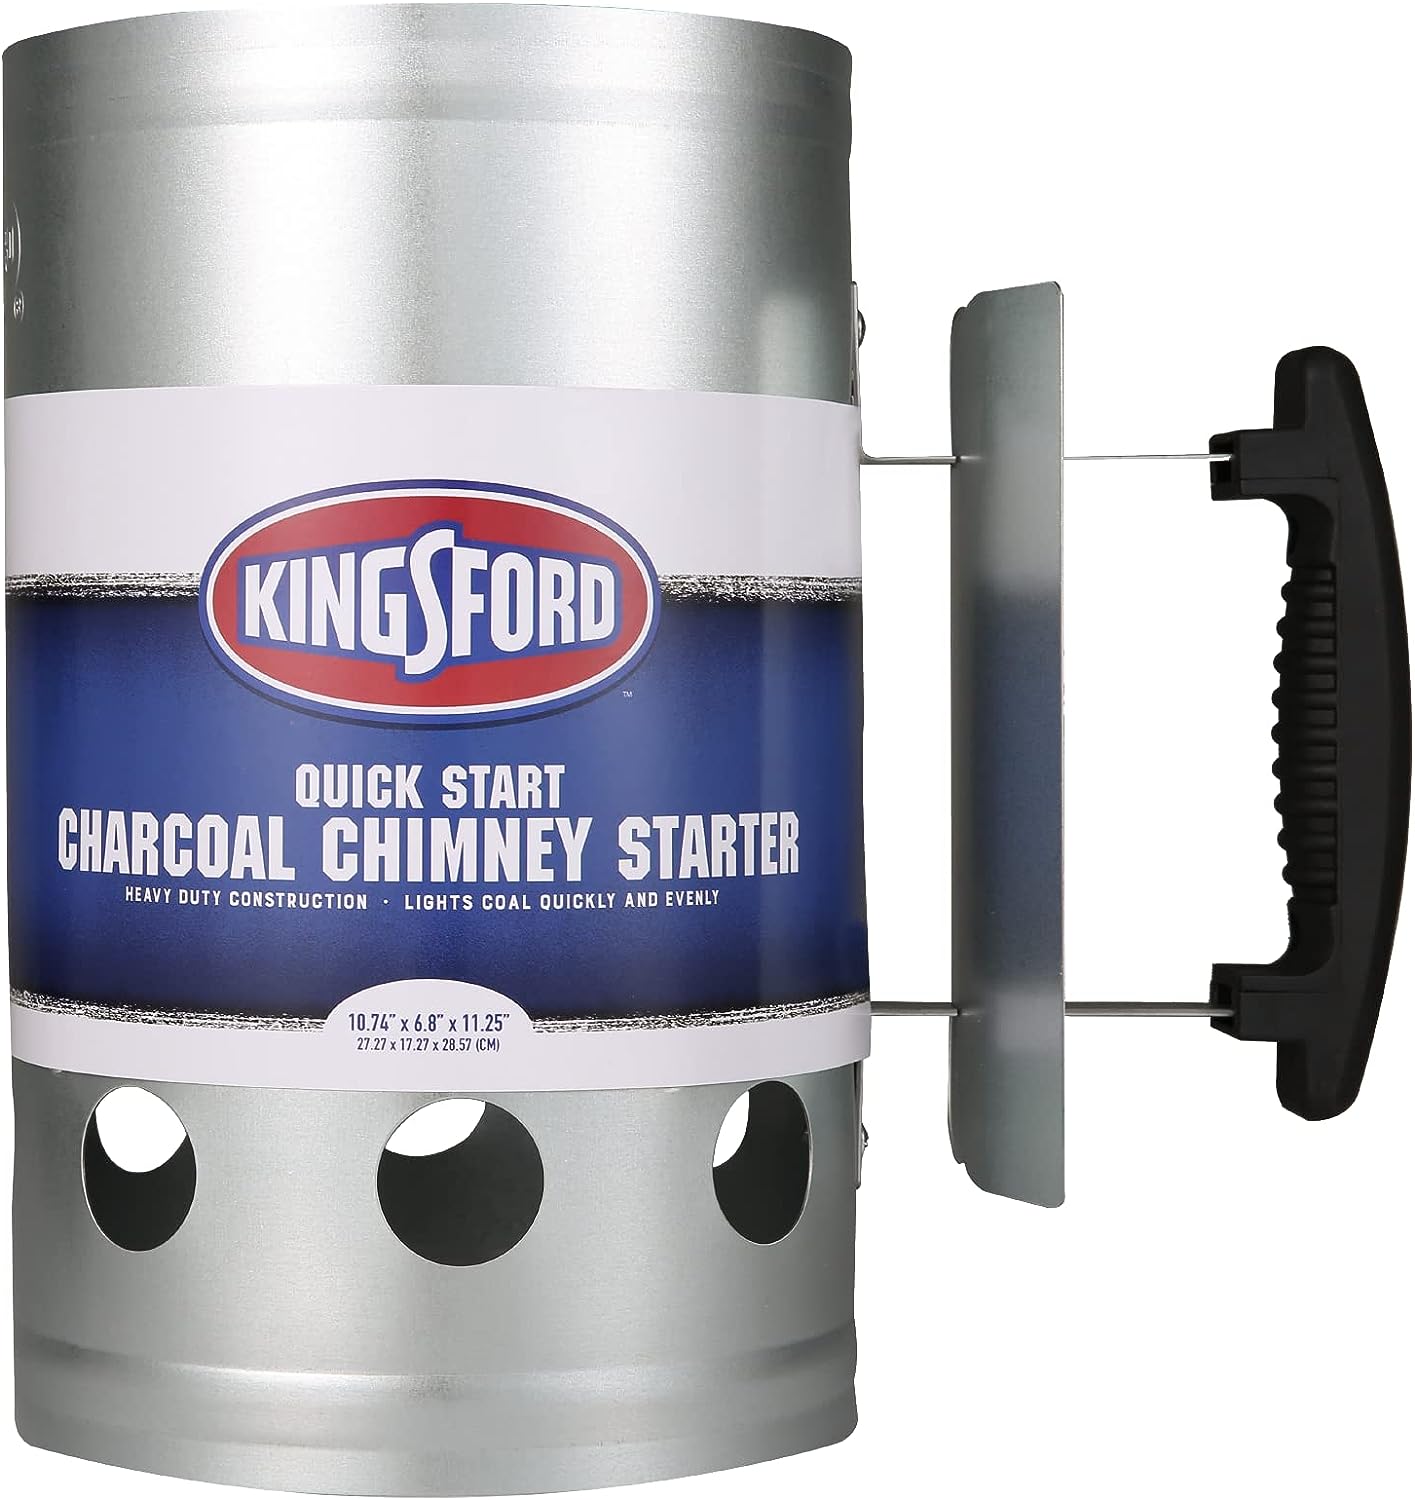 Best Chimney Starters for Quick and Easy Grilling